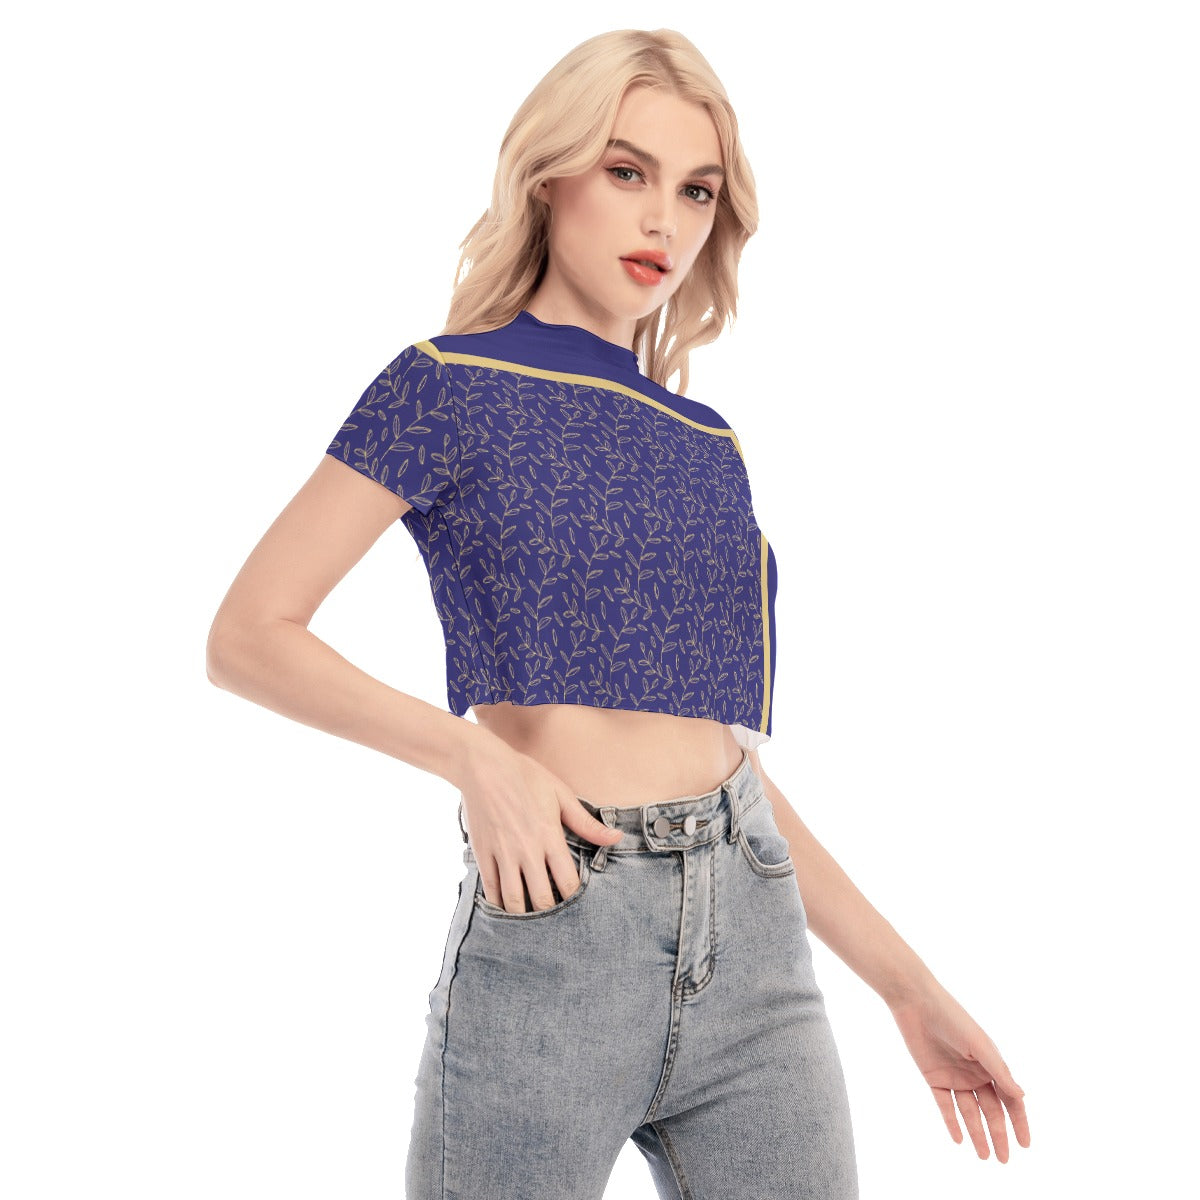 Super Bloom Collection Women's Short Sleeves Mesh Crop Top. Pattern hand-painted by the Designer Maria Alejandra Echenique